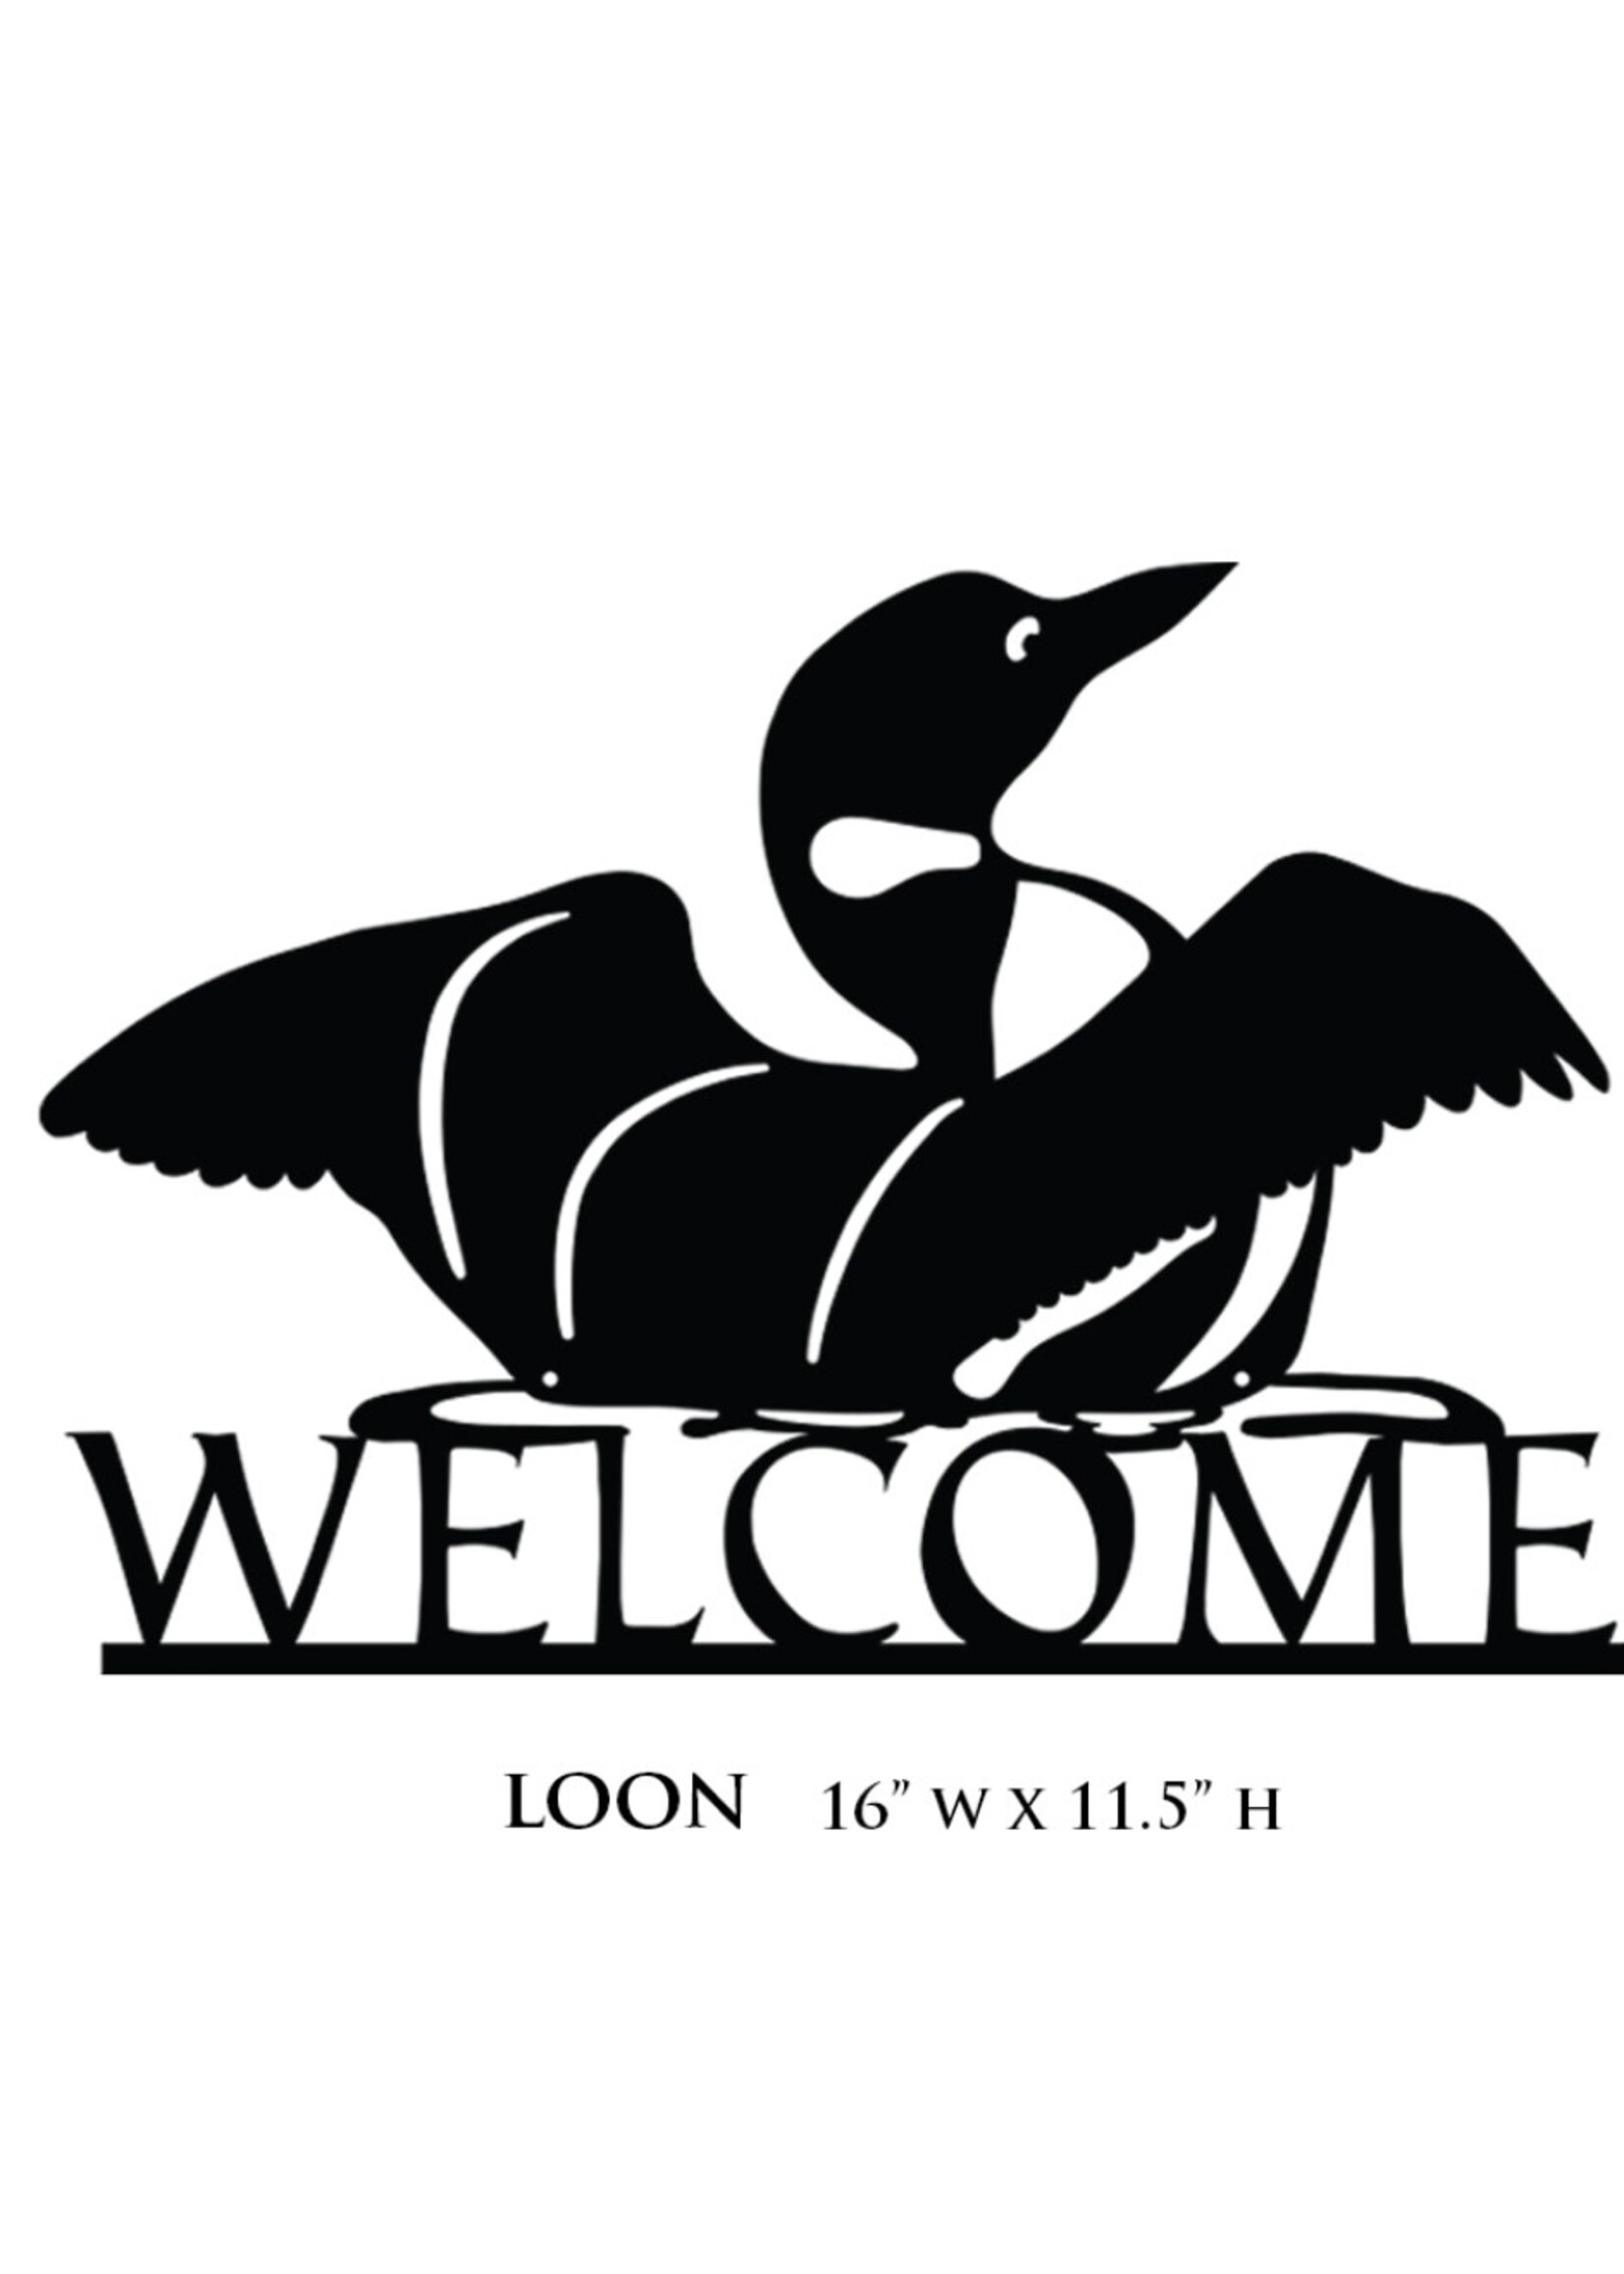 Handcrafted Welcome Loon Sign - PICK UP ONLY